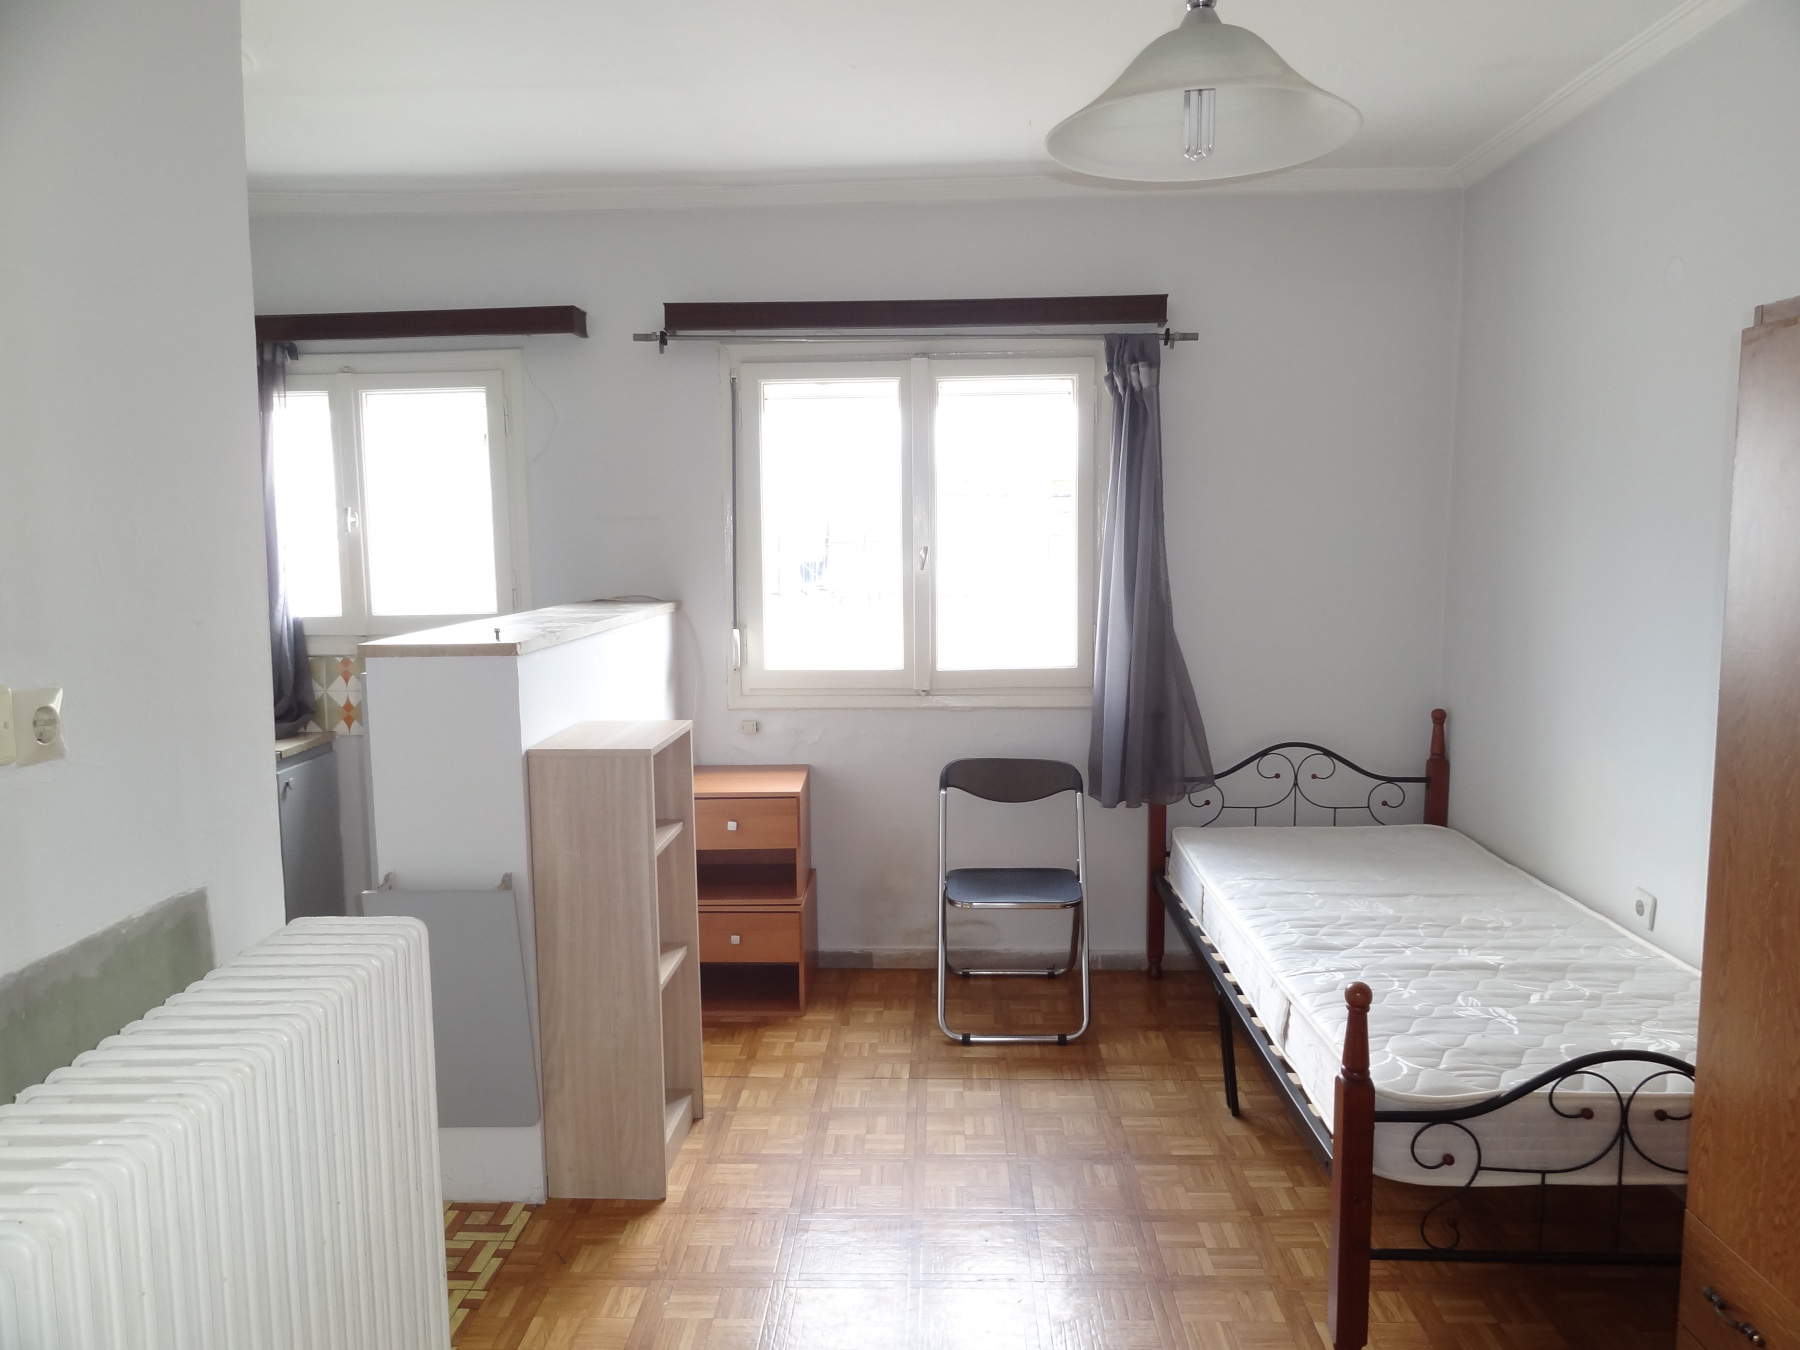 For sale a studio of 25 sq.m. in the center of Ioannina on Korai Street